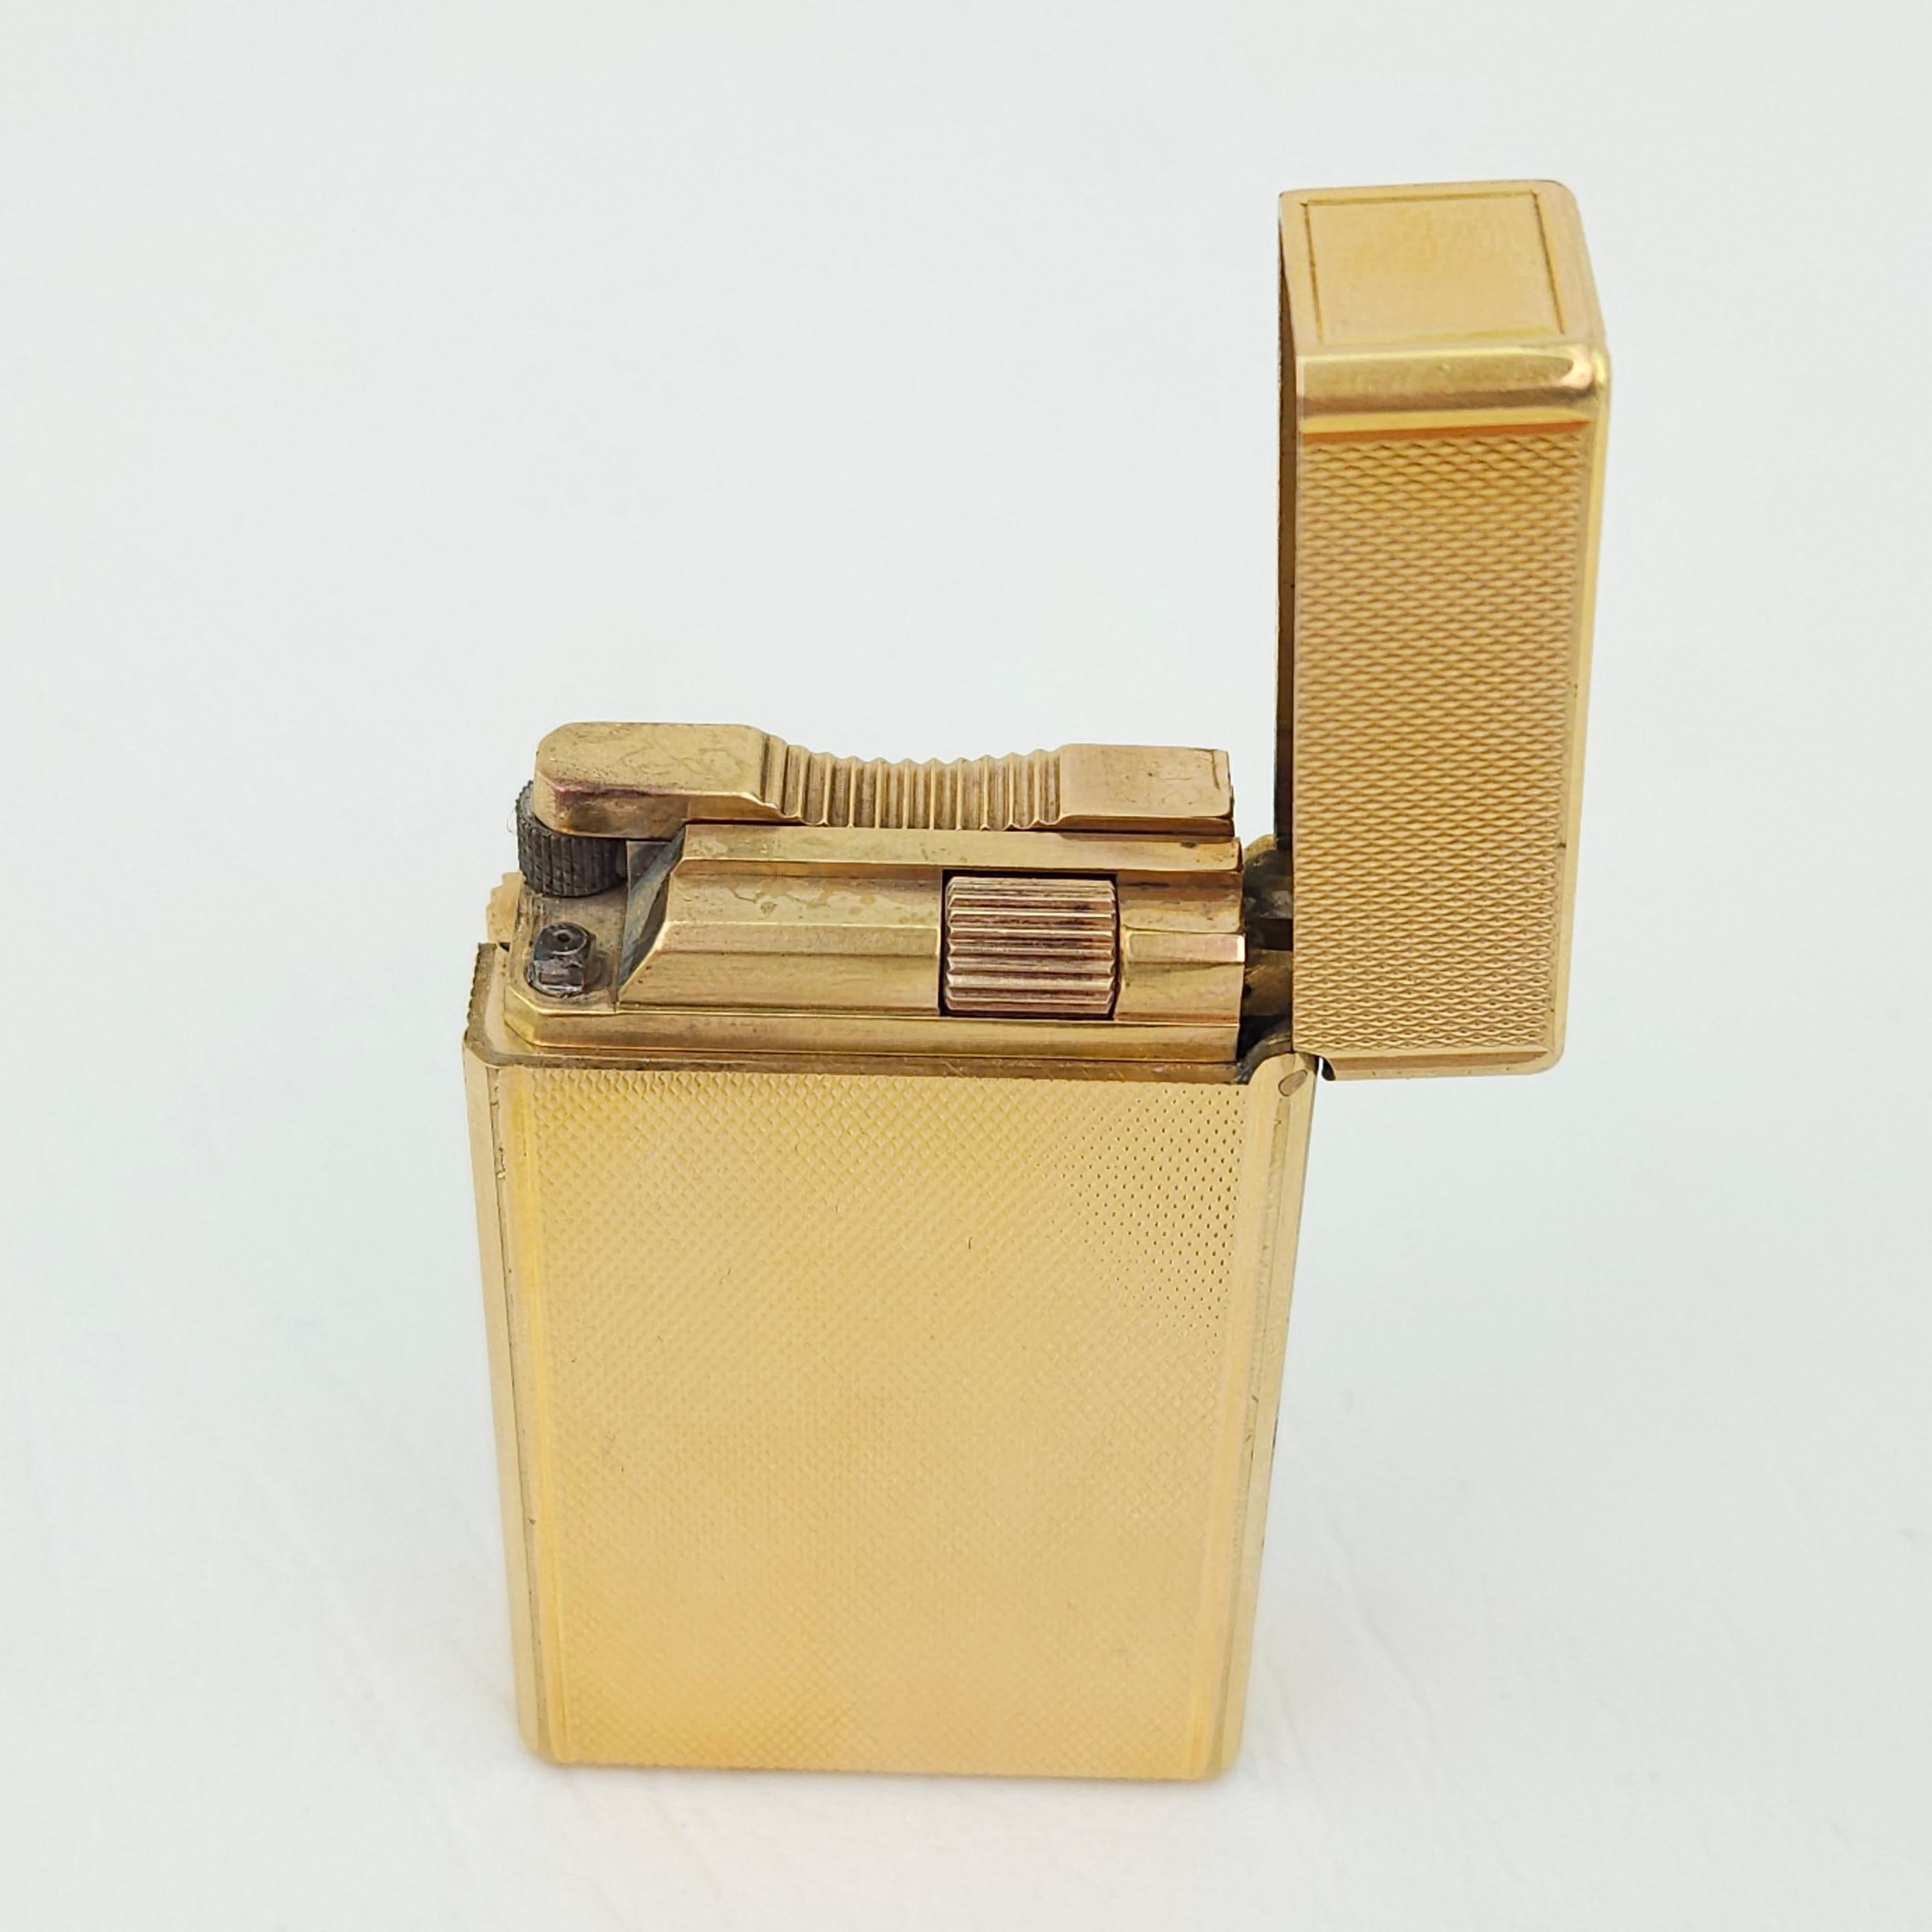 Vintage Gold-Plated Gas Lighter By S. T. Dupont, Paris In Excellent Condition For Sale In Hamilton, Ontario